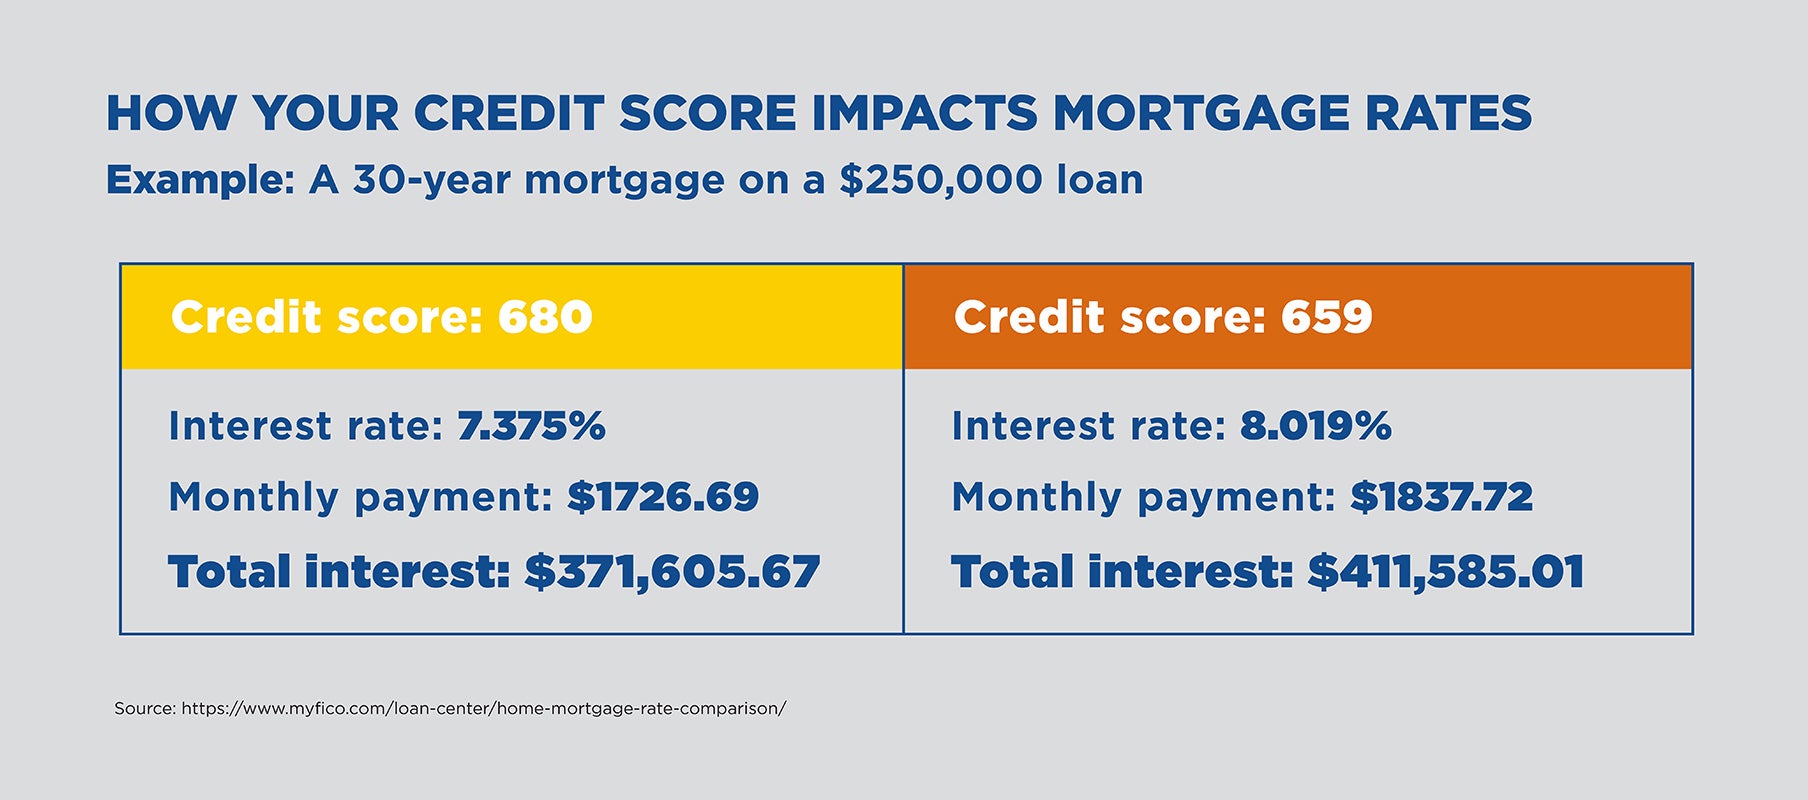 Chart showing how your credit score impacts mortgage rates, using the example of a 30-year mortgage on a $250,000 home loan